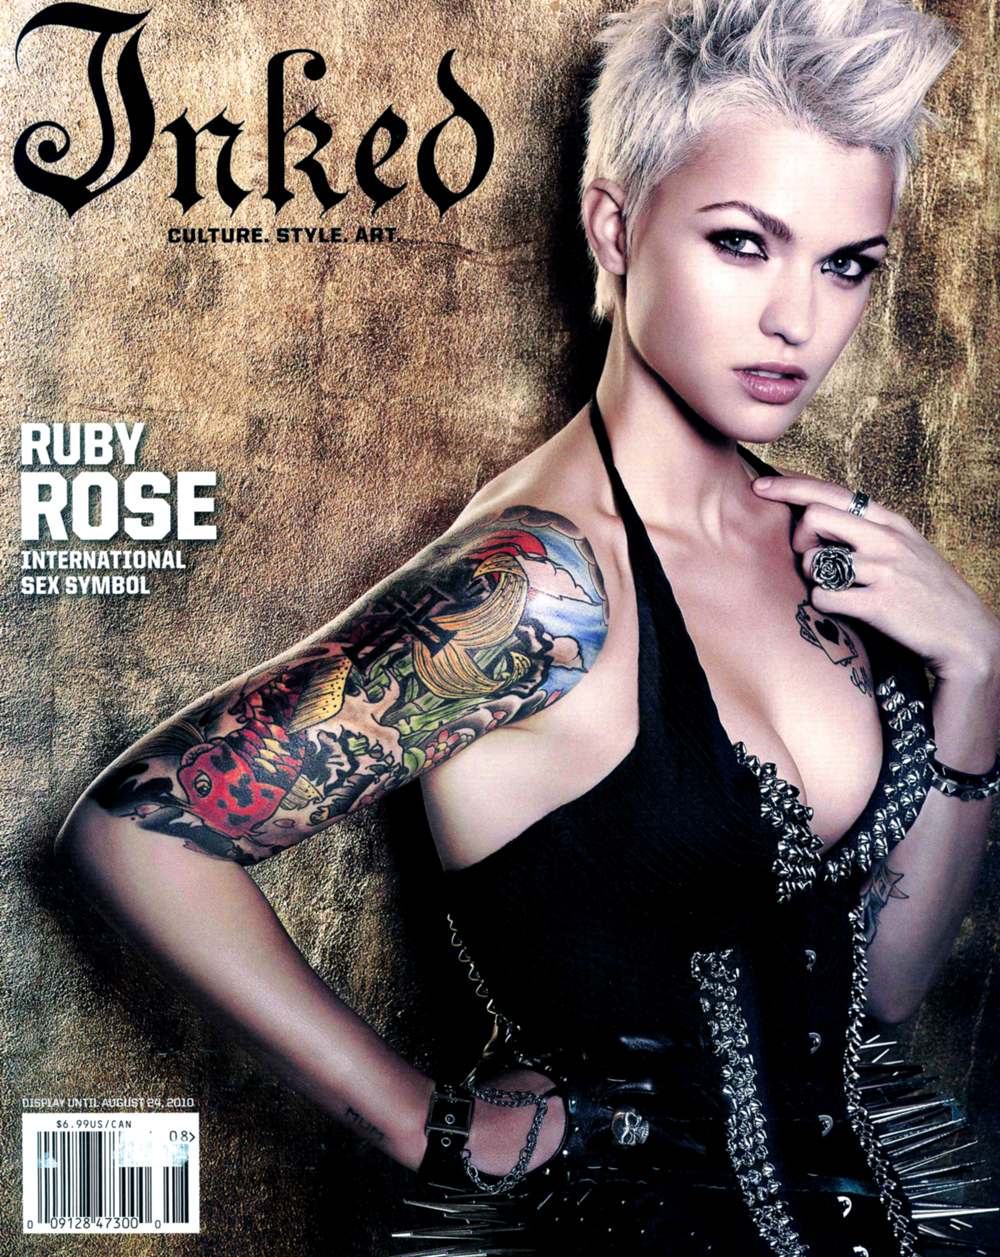 Tattoo Industry Magazine Issue 19: Chad Tepper by Tattoo Industry Magazine  - Issuu